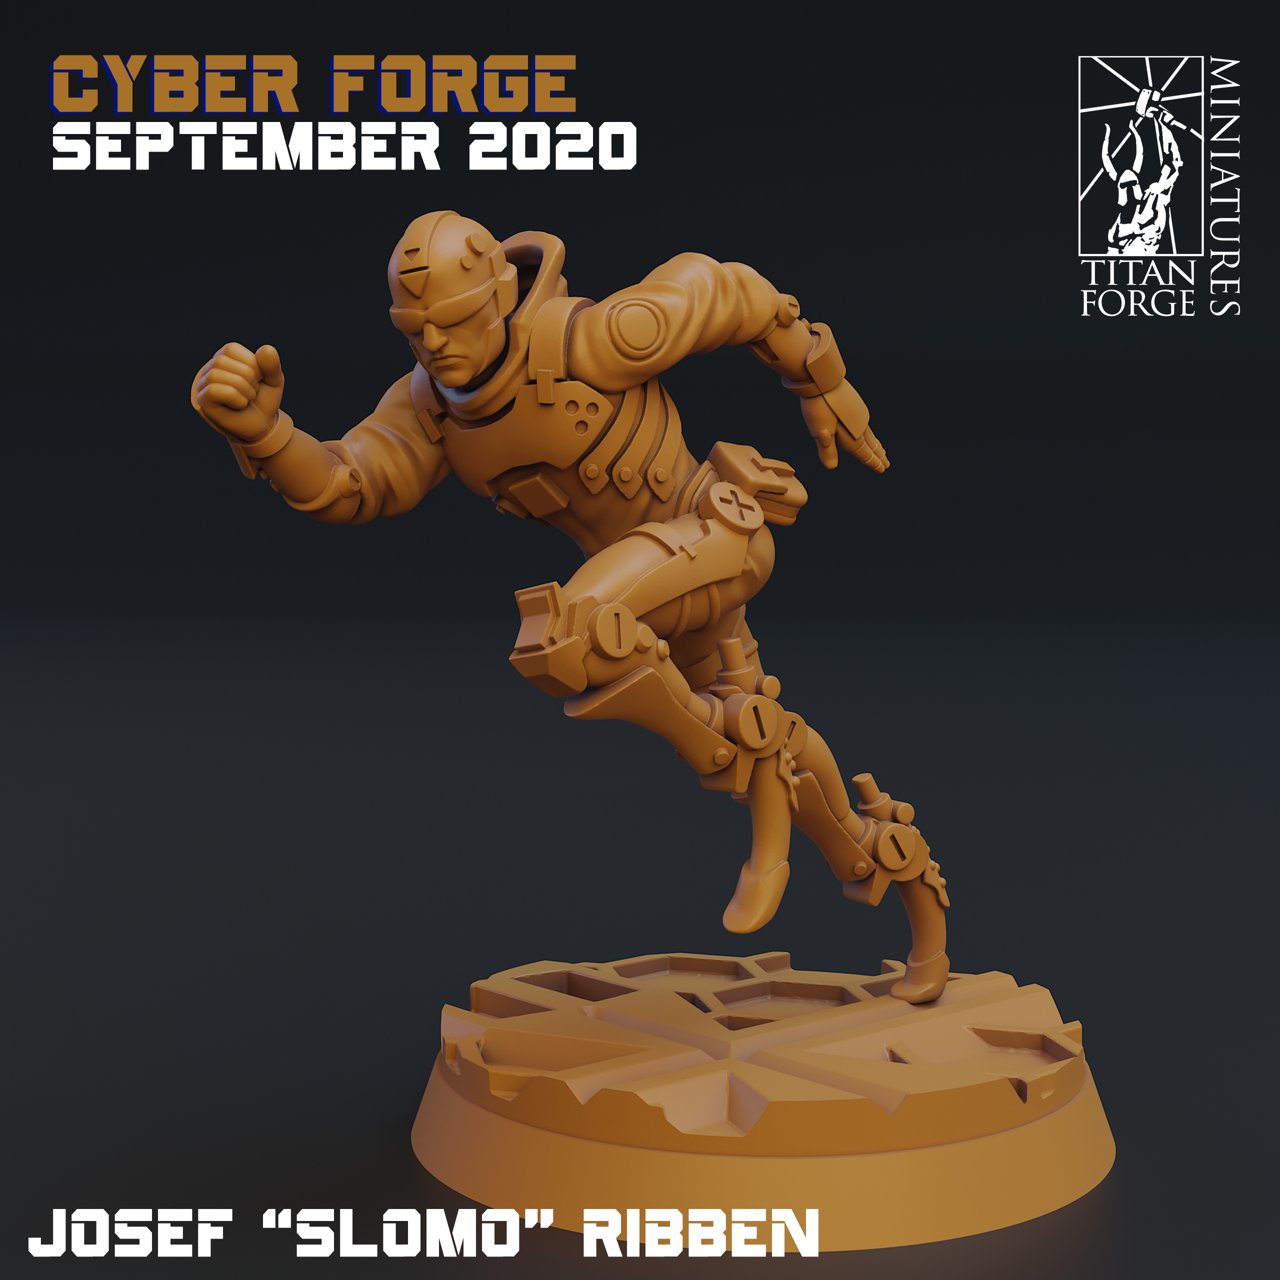 Cyber-Forge Miniatures September 2020 Cyber Forge  MINISTL 7